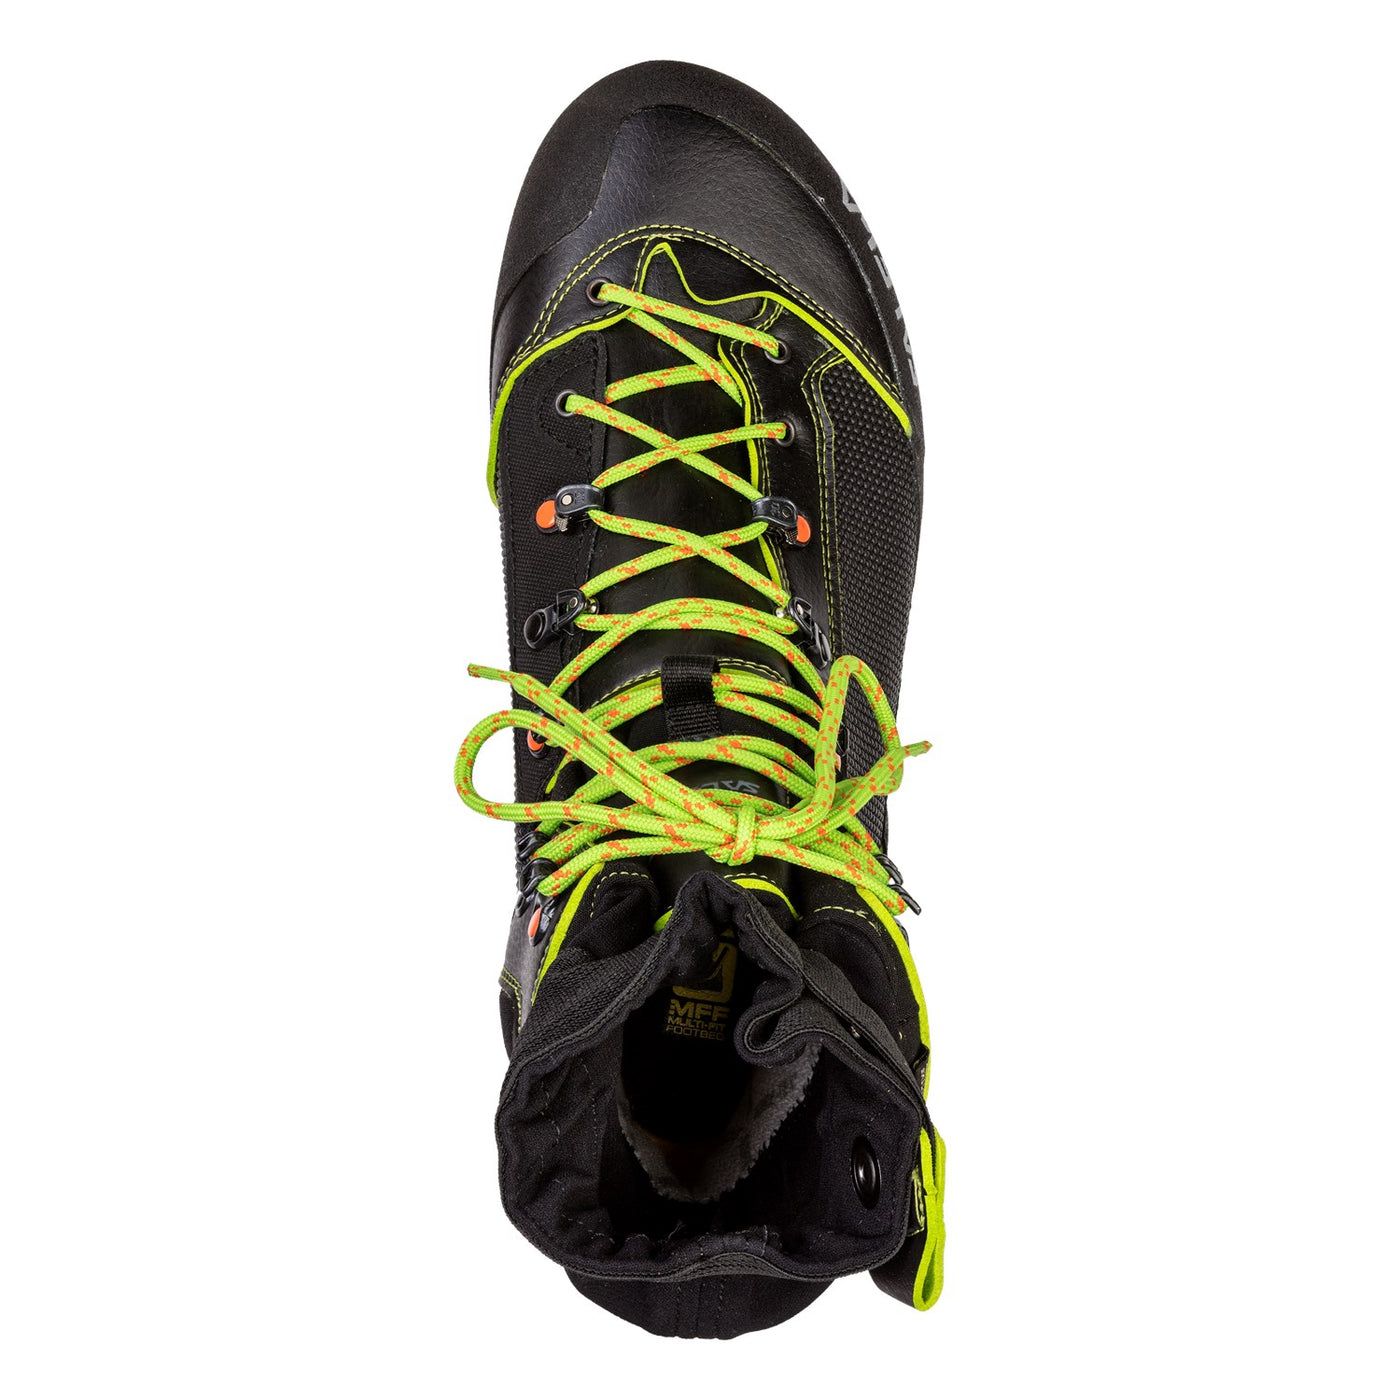 Salewa Vulture Vertical Gore-Tex | Mountaineering and Climbing Boots